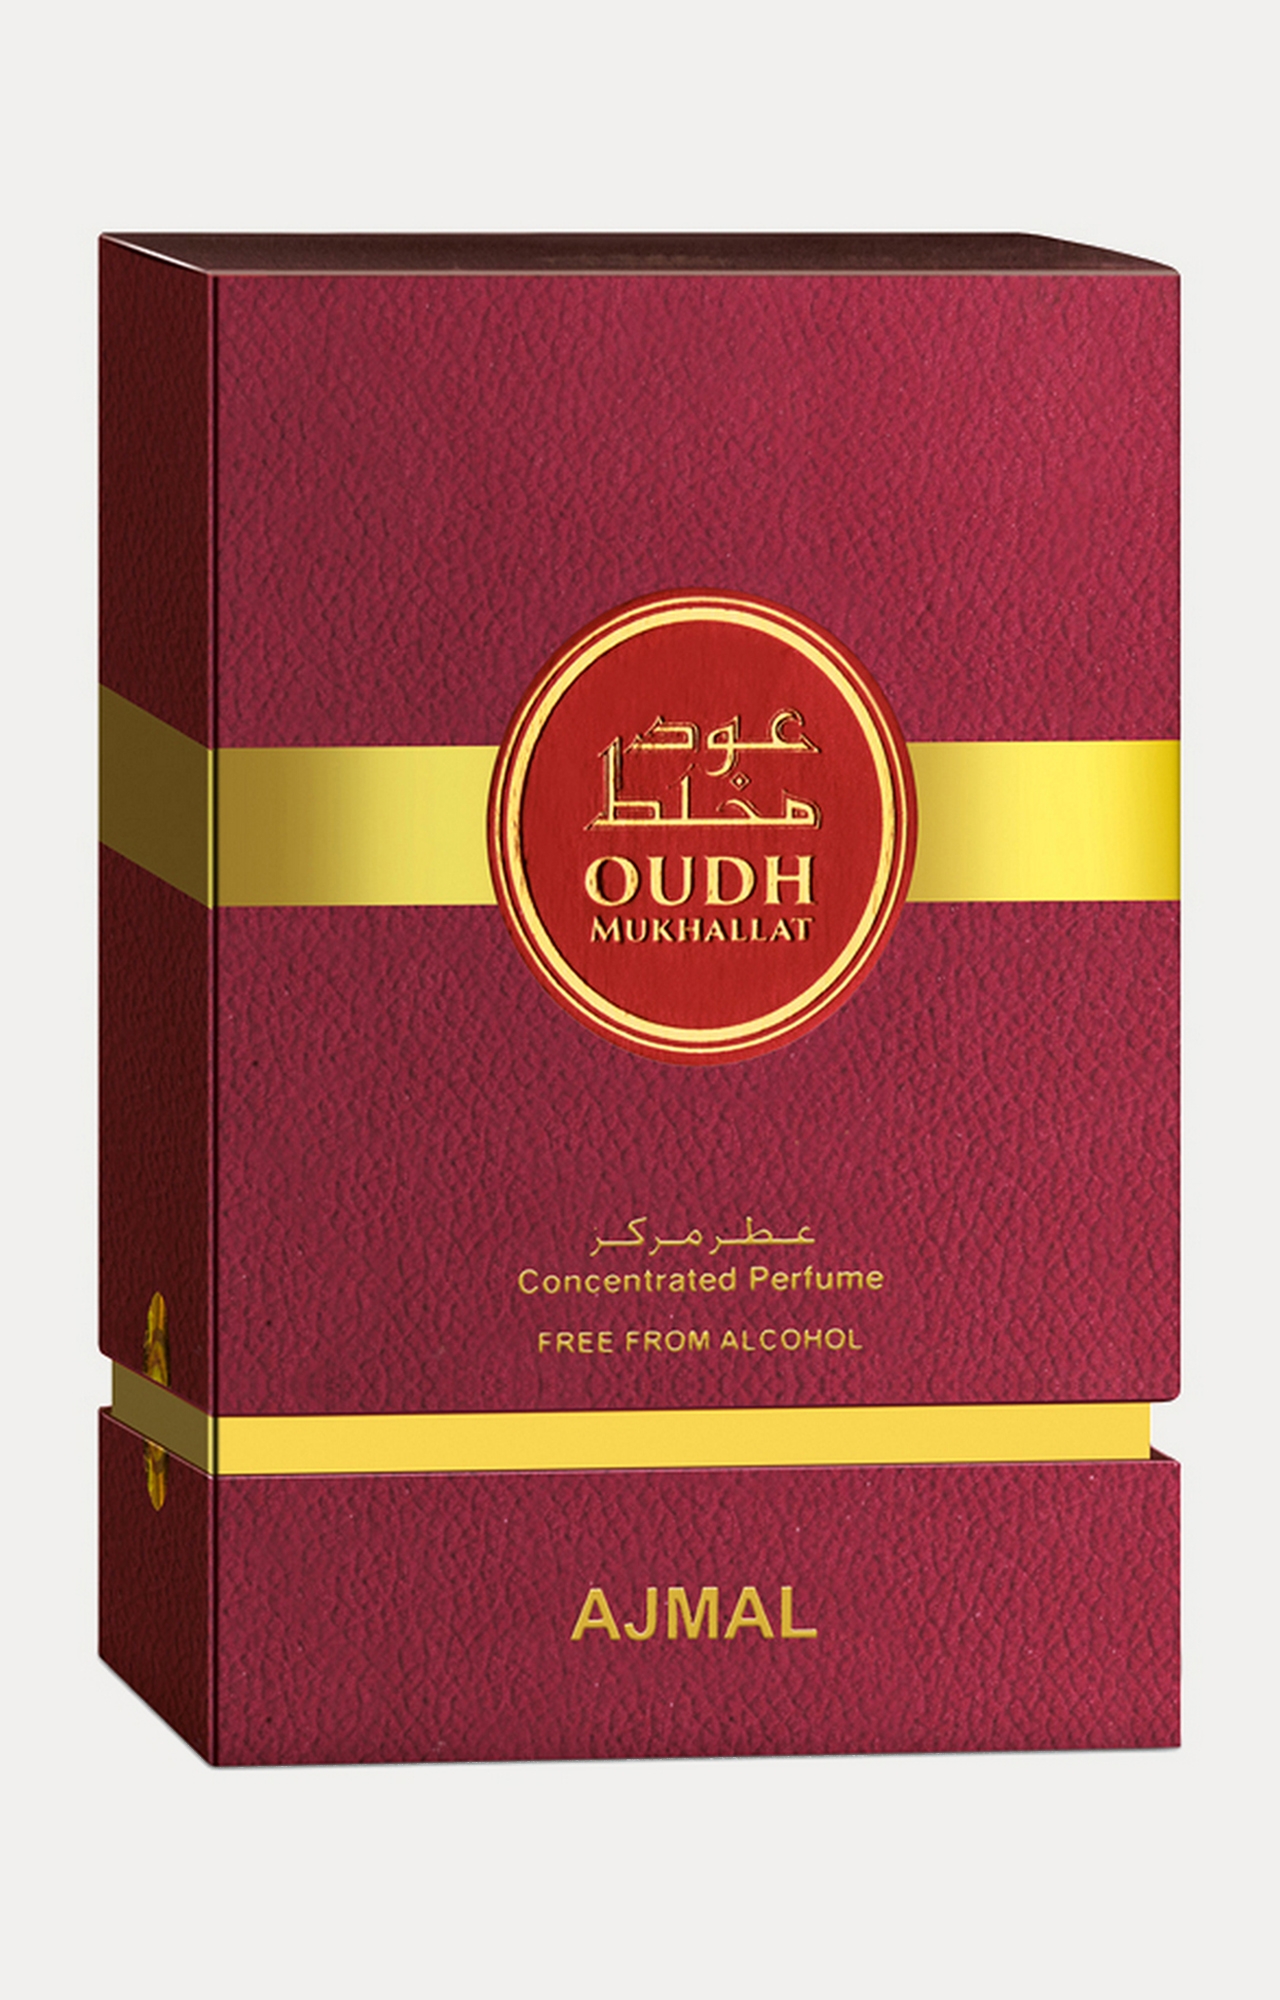 Ajmal | Ajmal Oudh Mukhallat Concentrated Perfume Free From Alcohol 6ml for Unisex 2